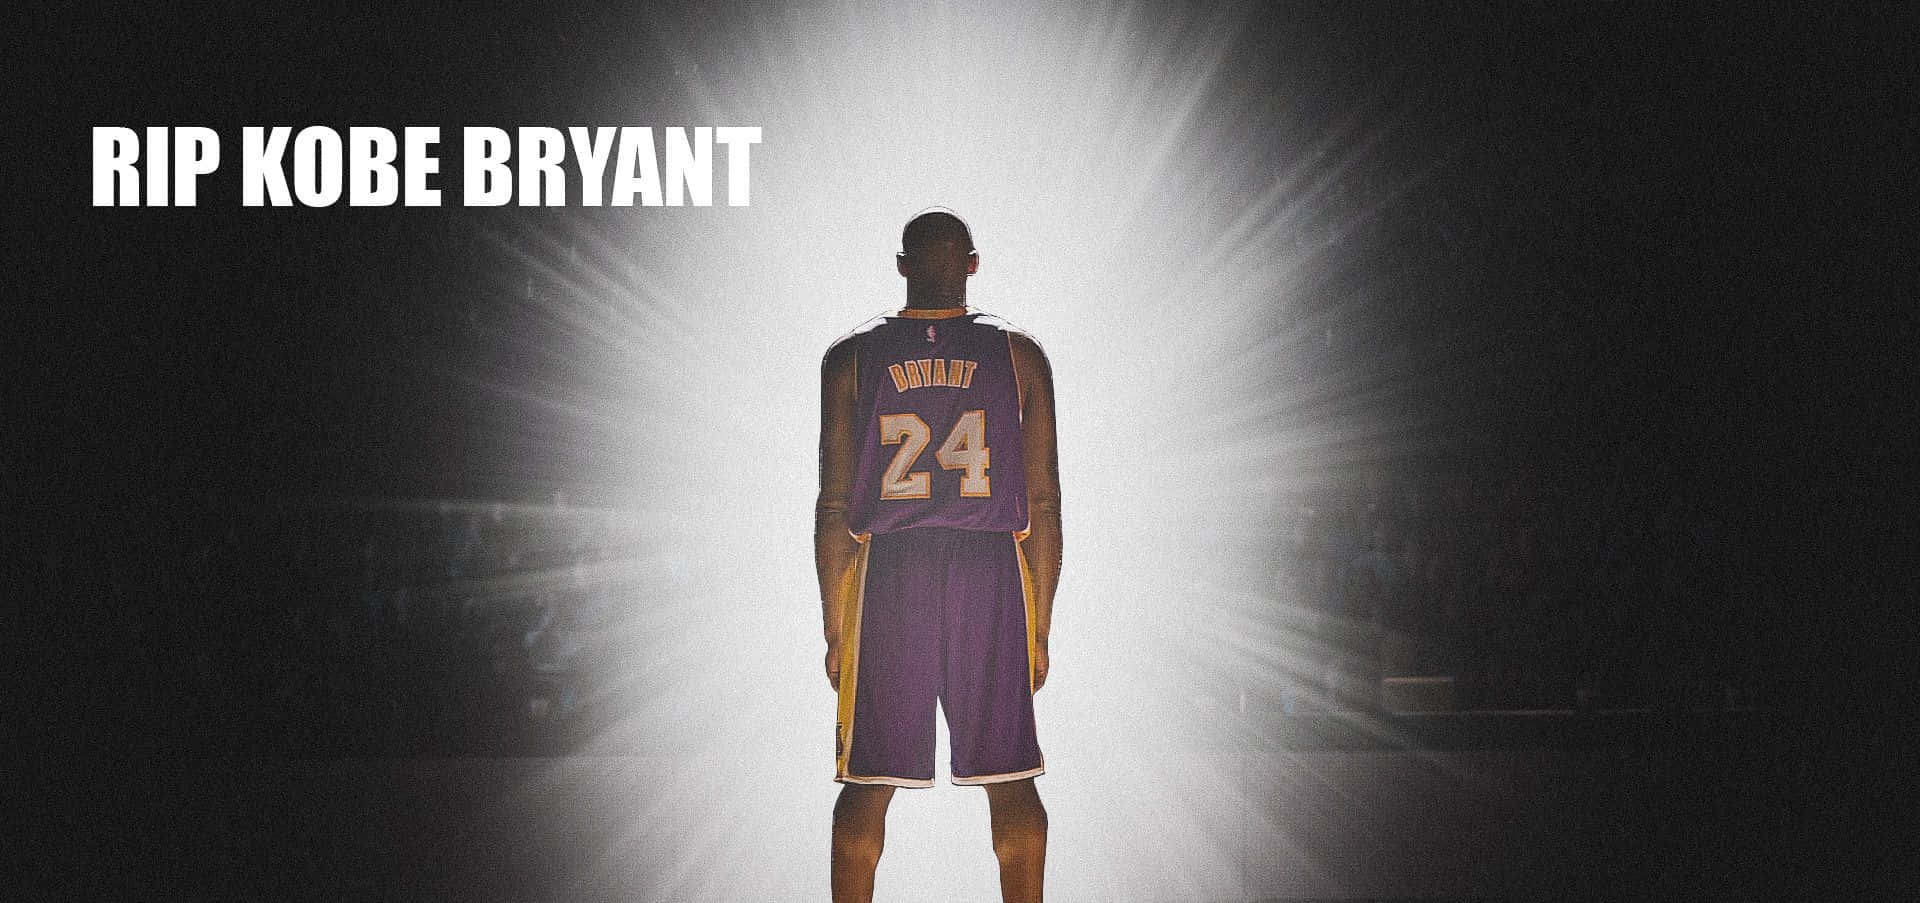 "#MambaMentality: Kobe Bryant on and off the court"